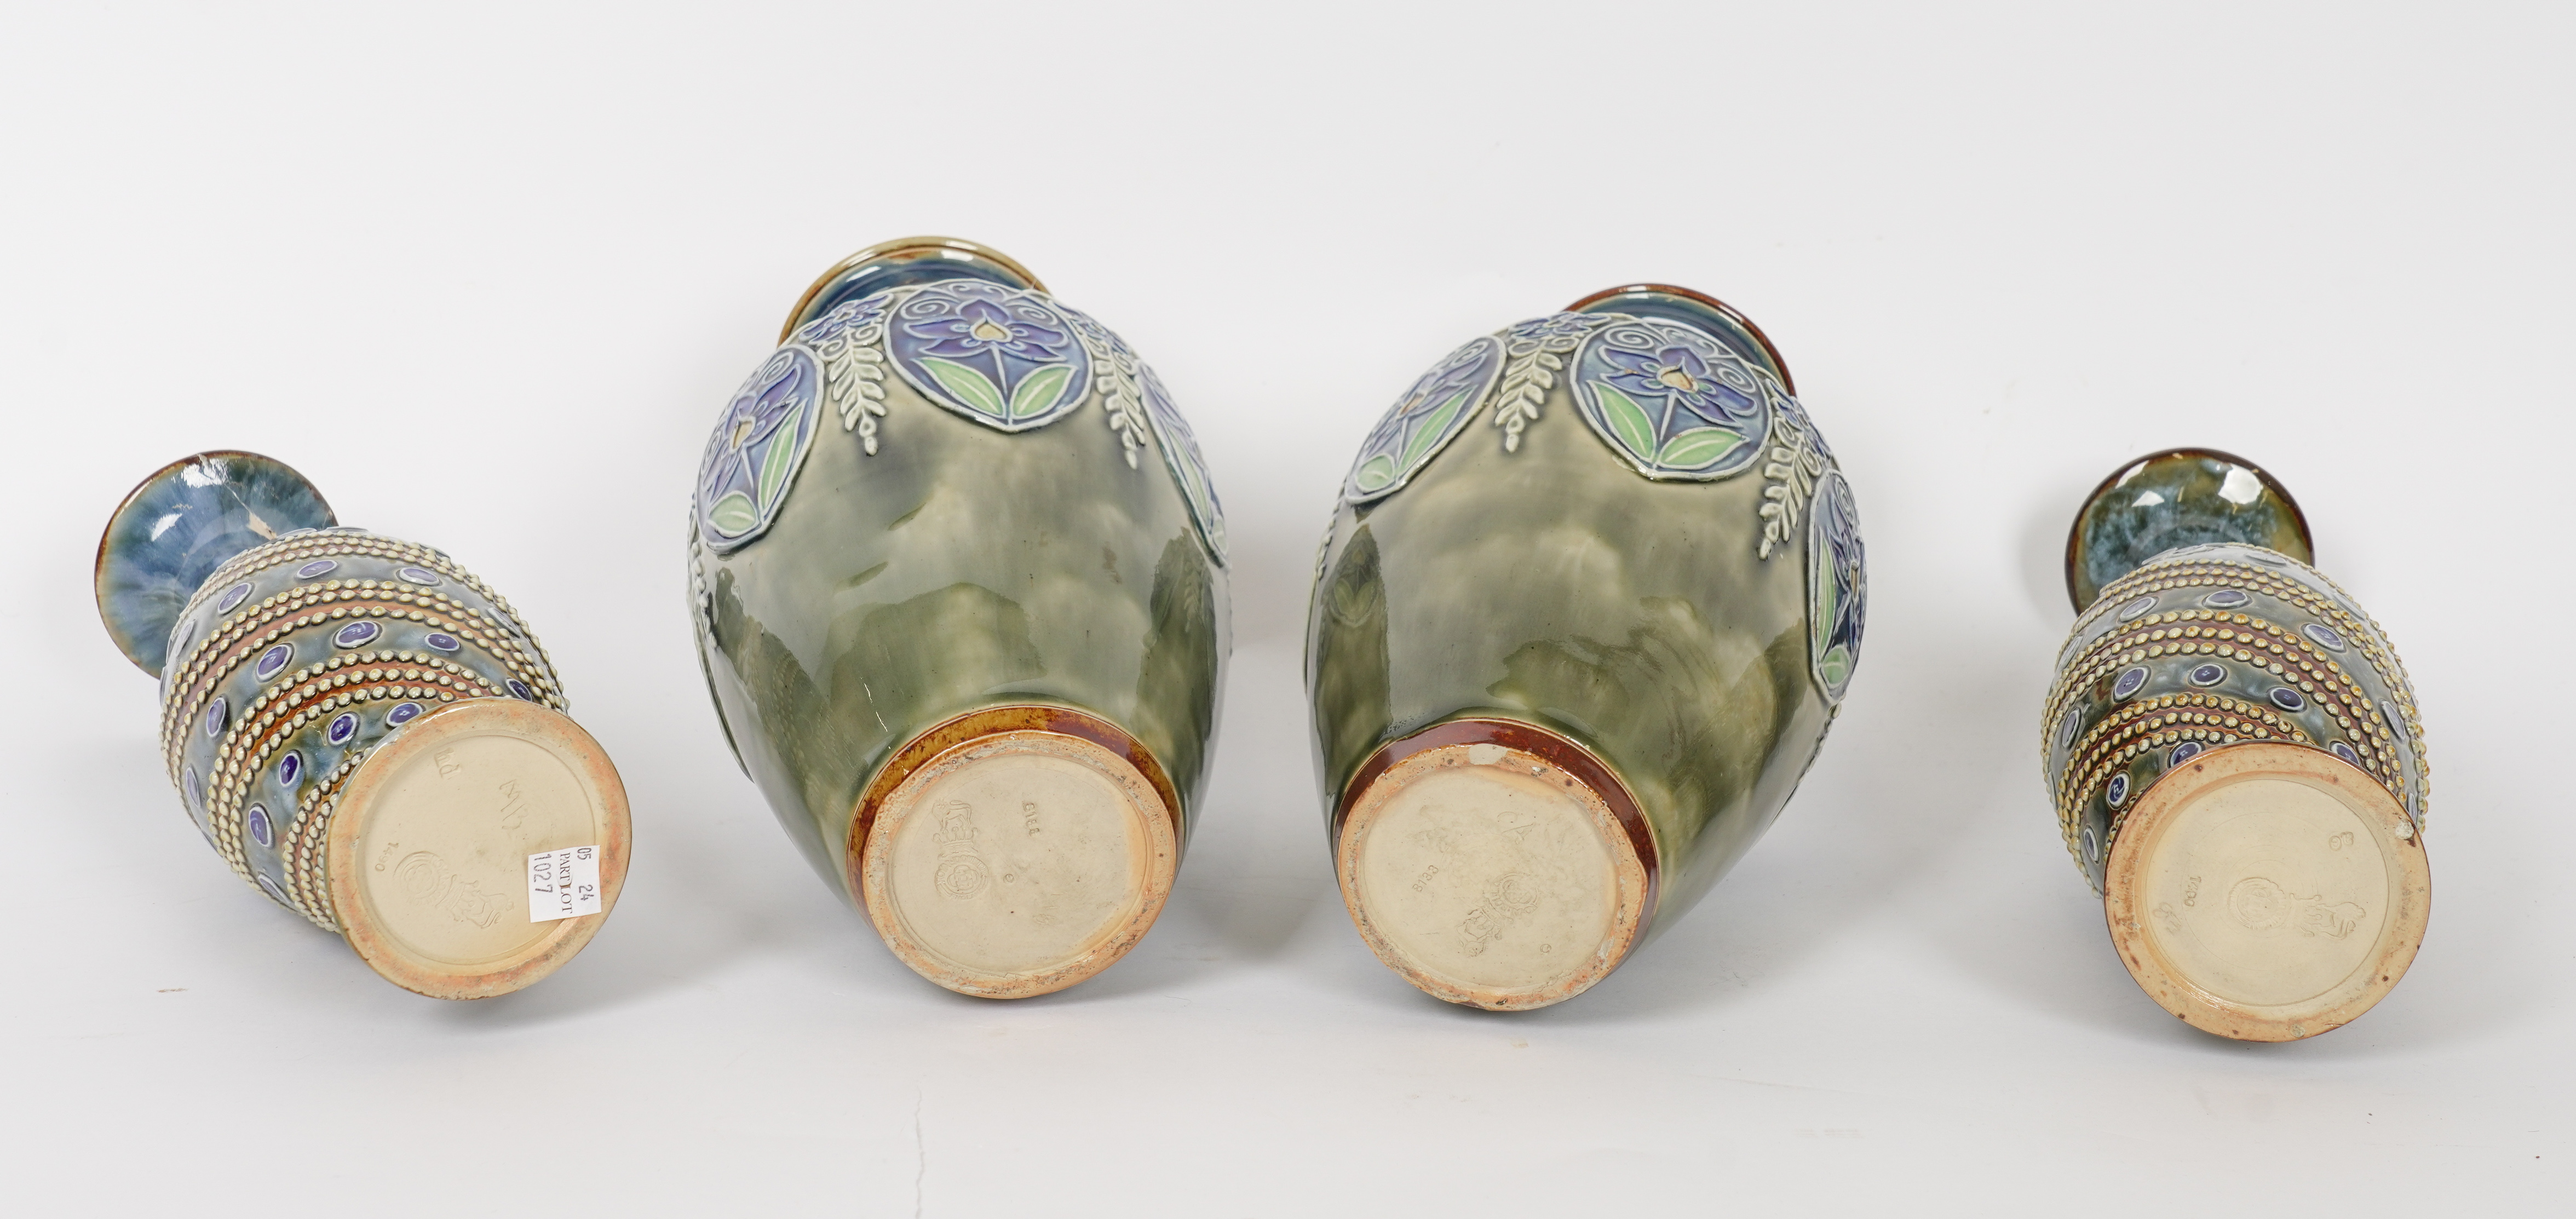 TWO PAIRS OF ROYAL DOULTON STONEWARE VASES (4) - Image 5 of 5